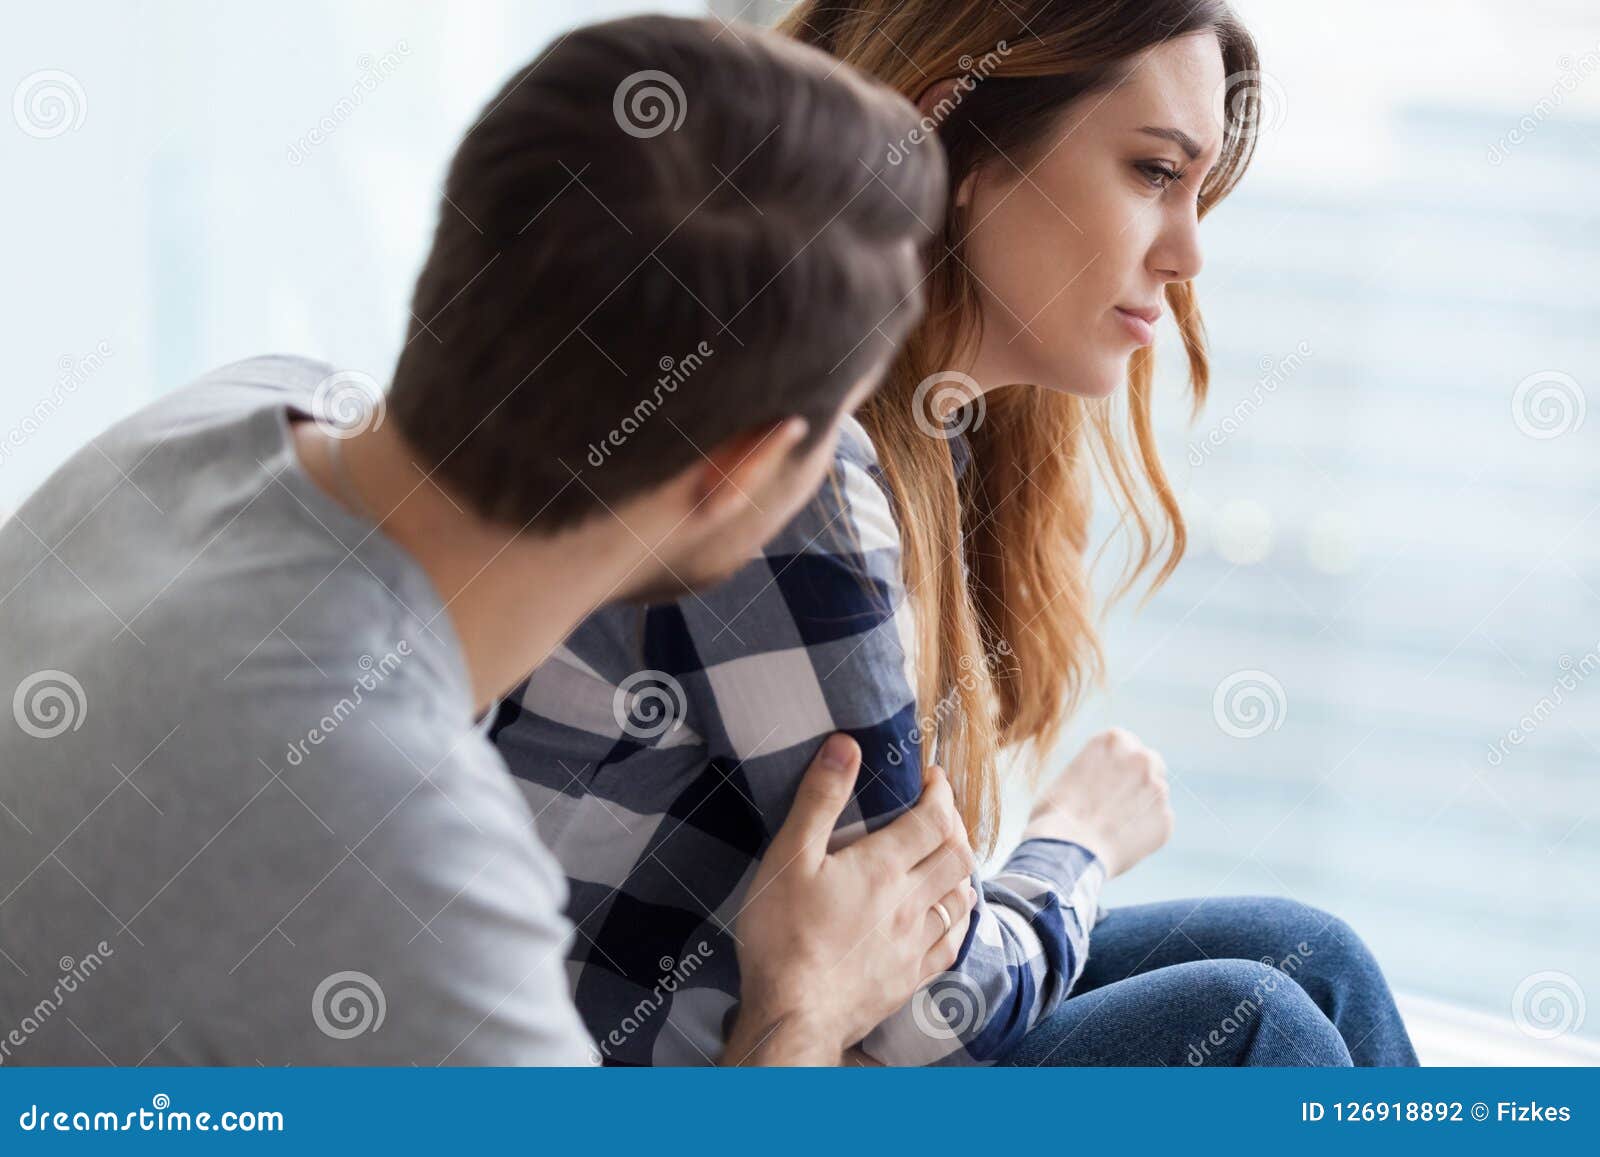 Caring Man Comforting Upset Wife after Fight Stock Photo - Image of ...